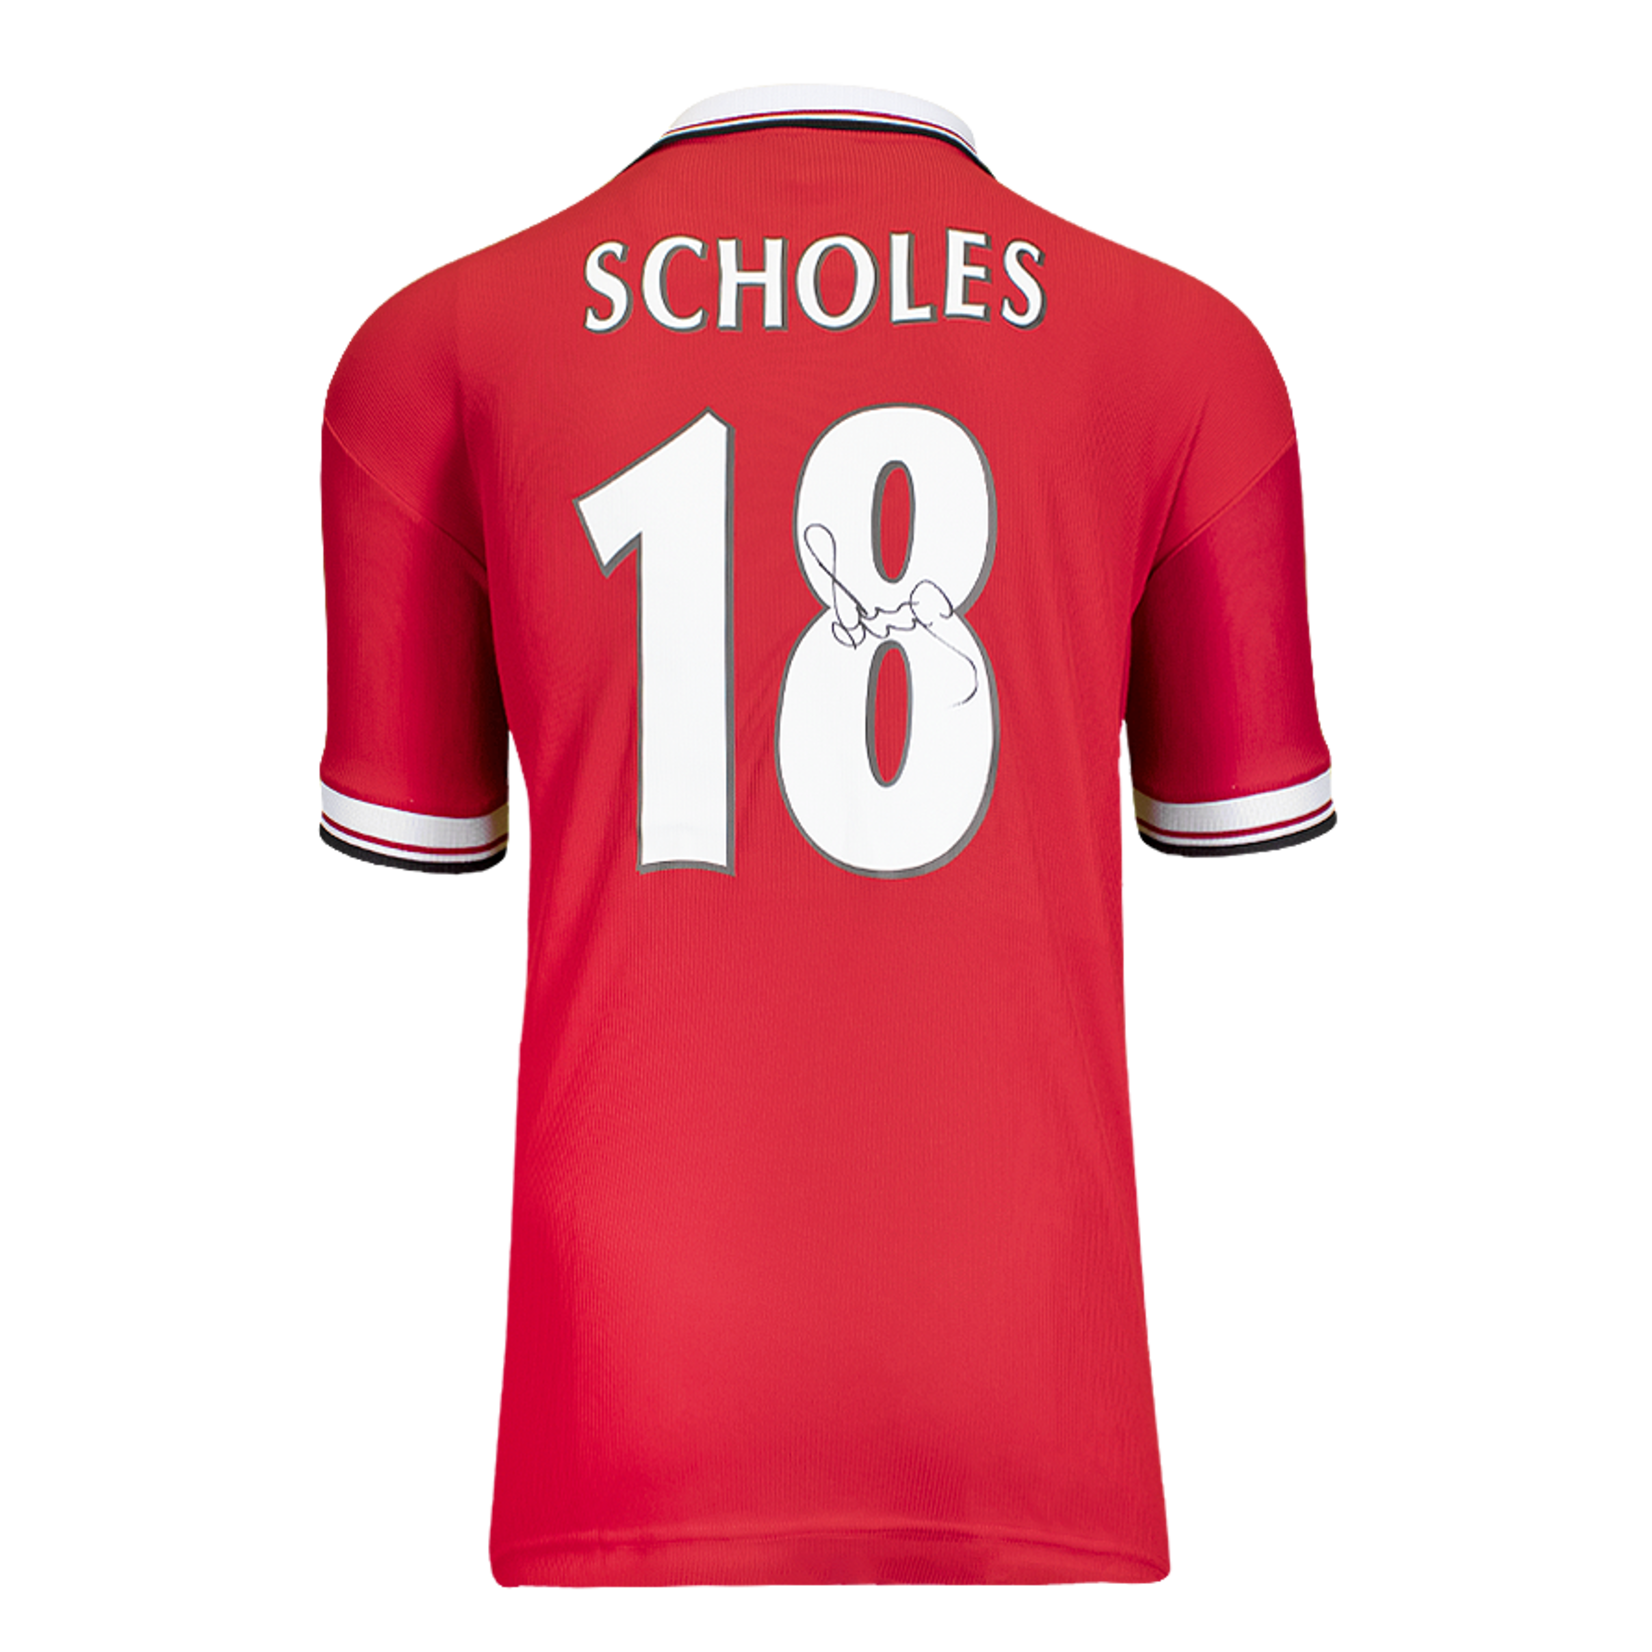 Paul Scholes Authentic Signed Manchester United 1999 Home Jersey